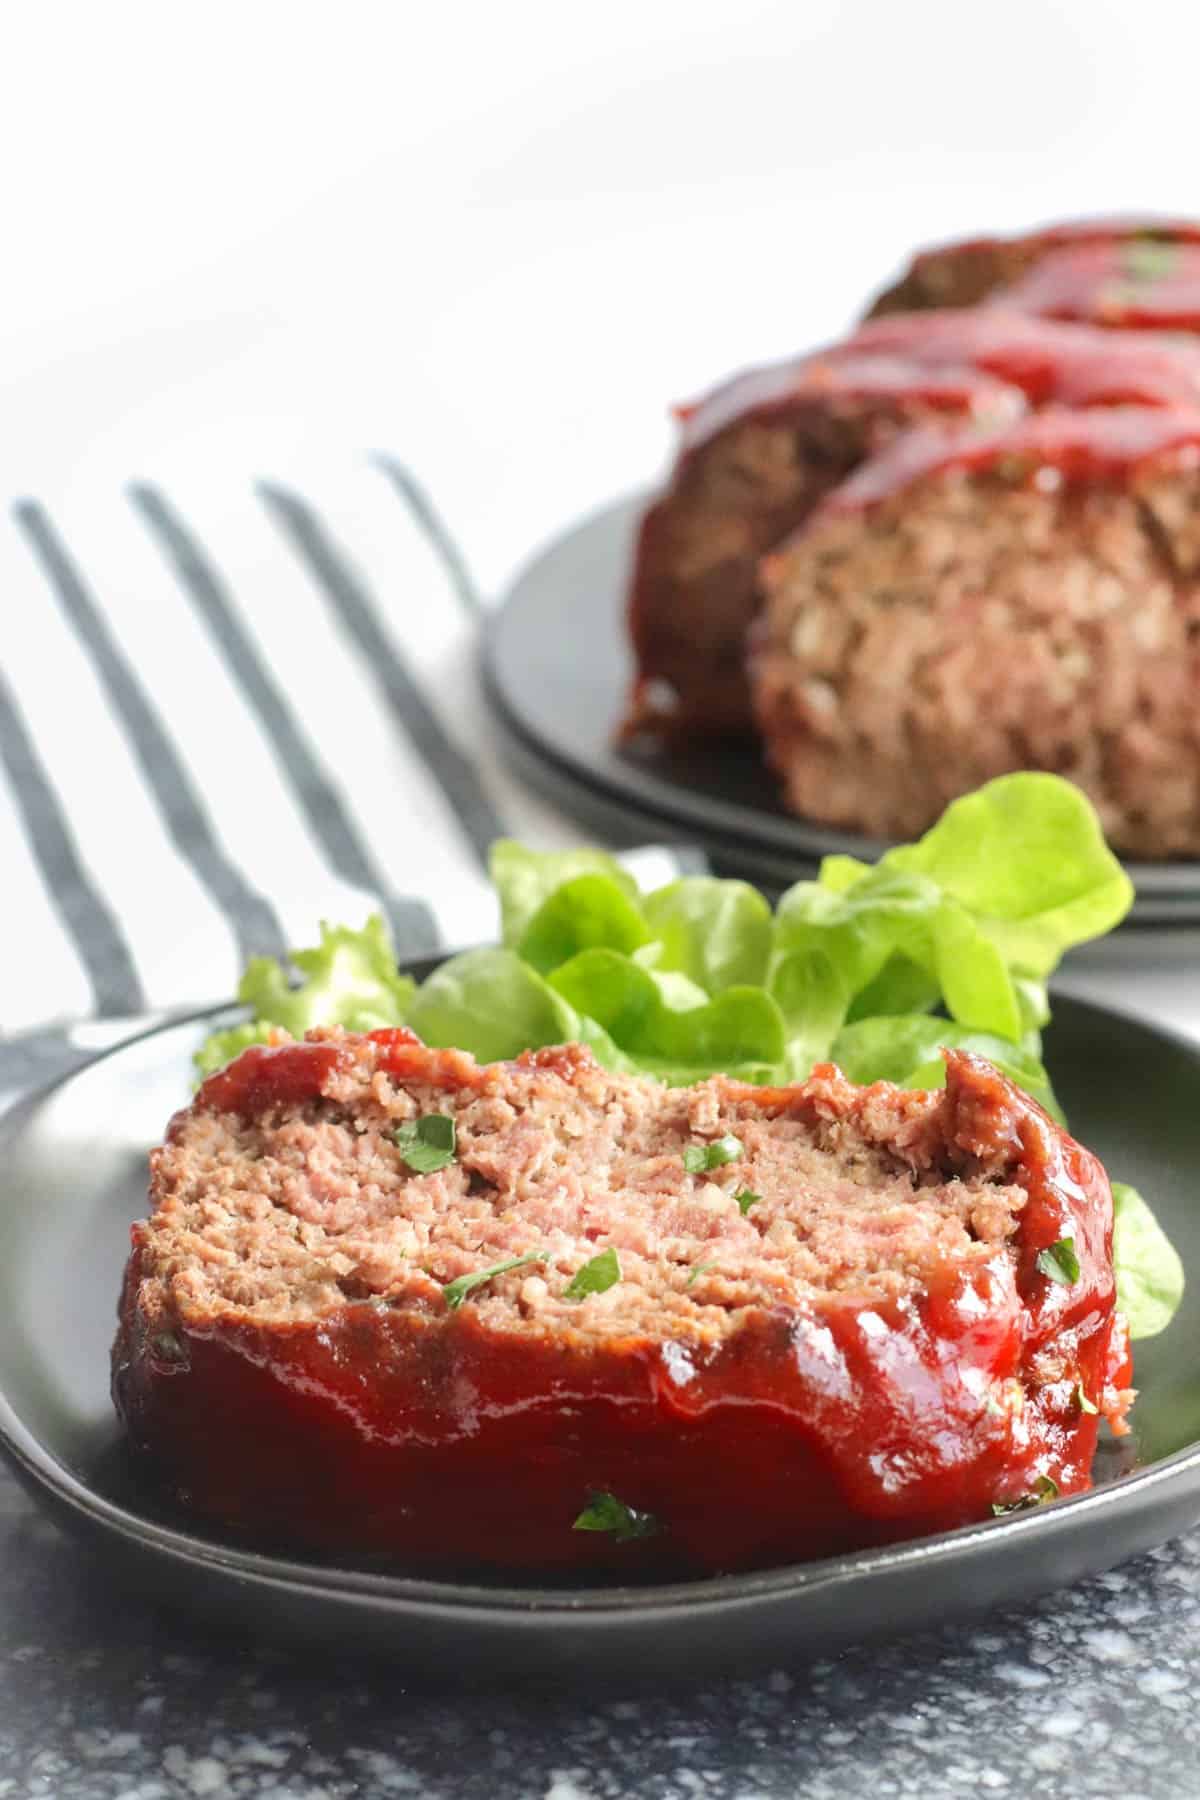 A piece of meatloaf laying flat on a black plat with a leaf of green lettuce.